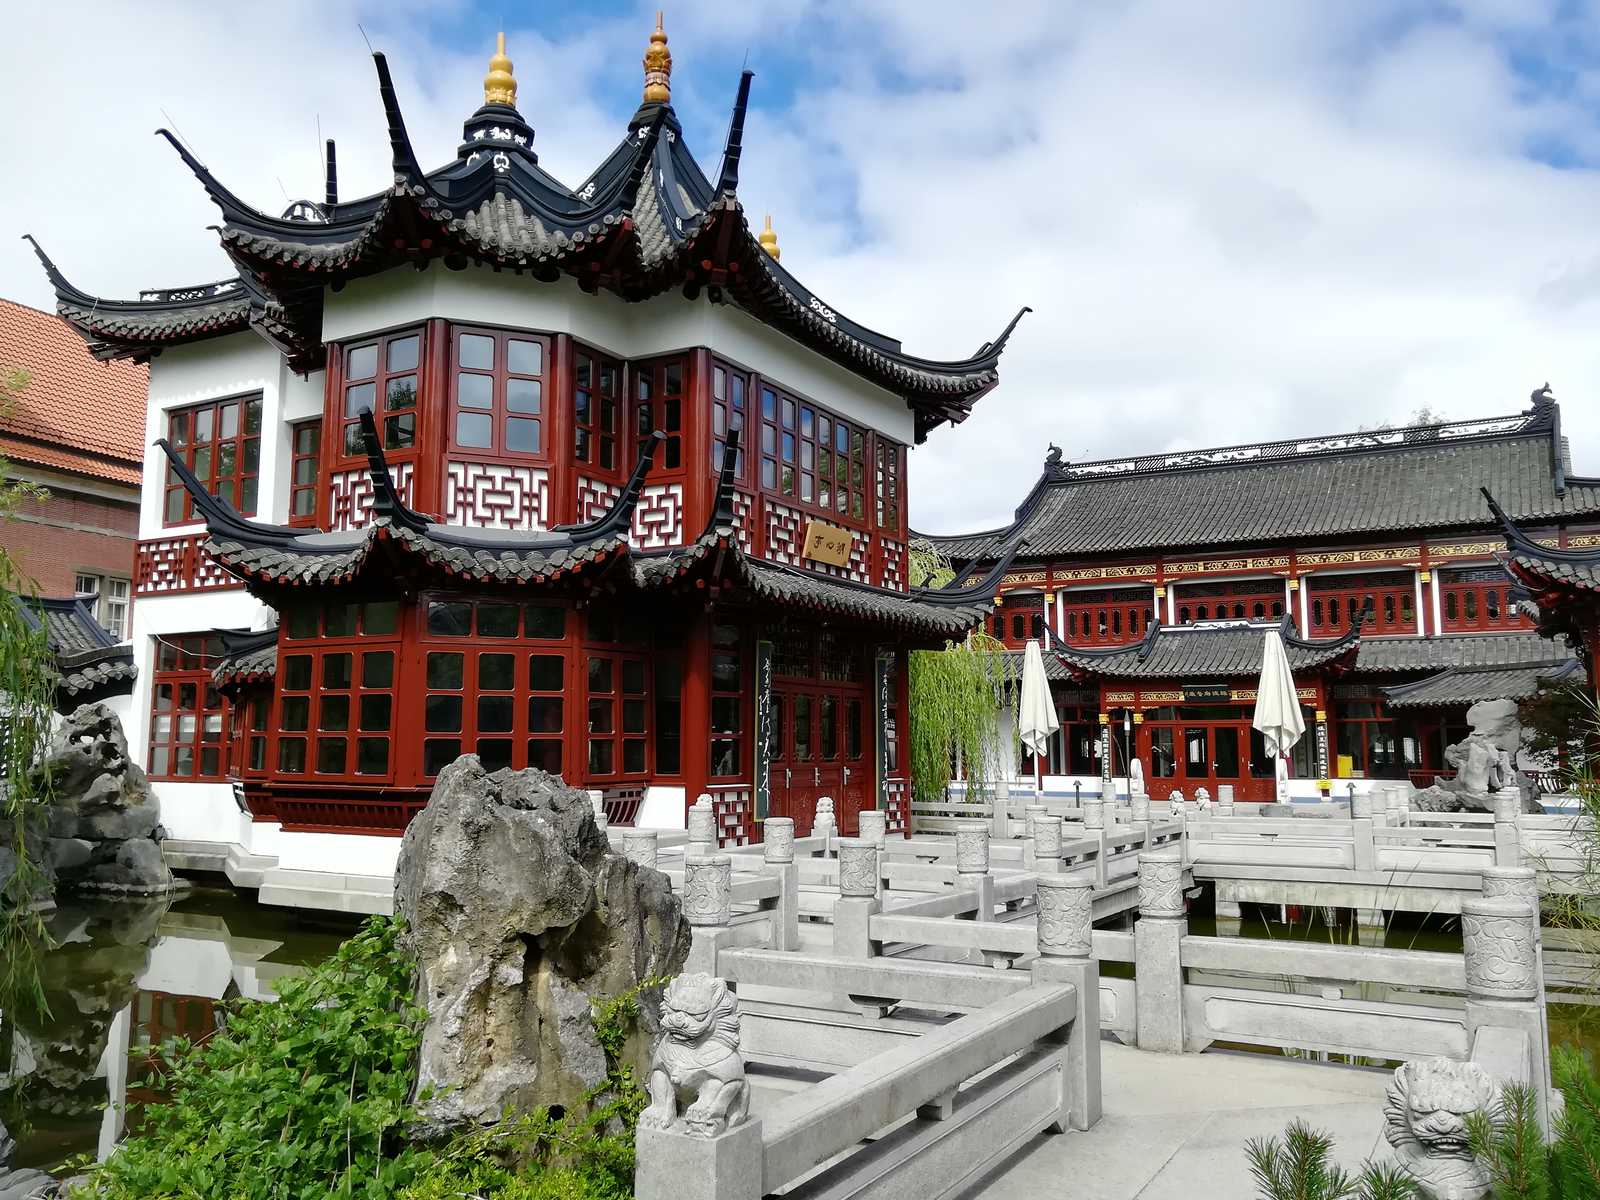 The image shows a chinese pagode building in the german city of Hamburg.